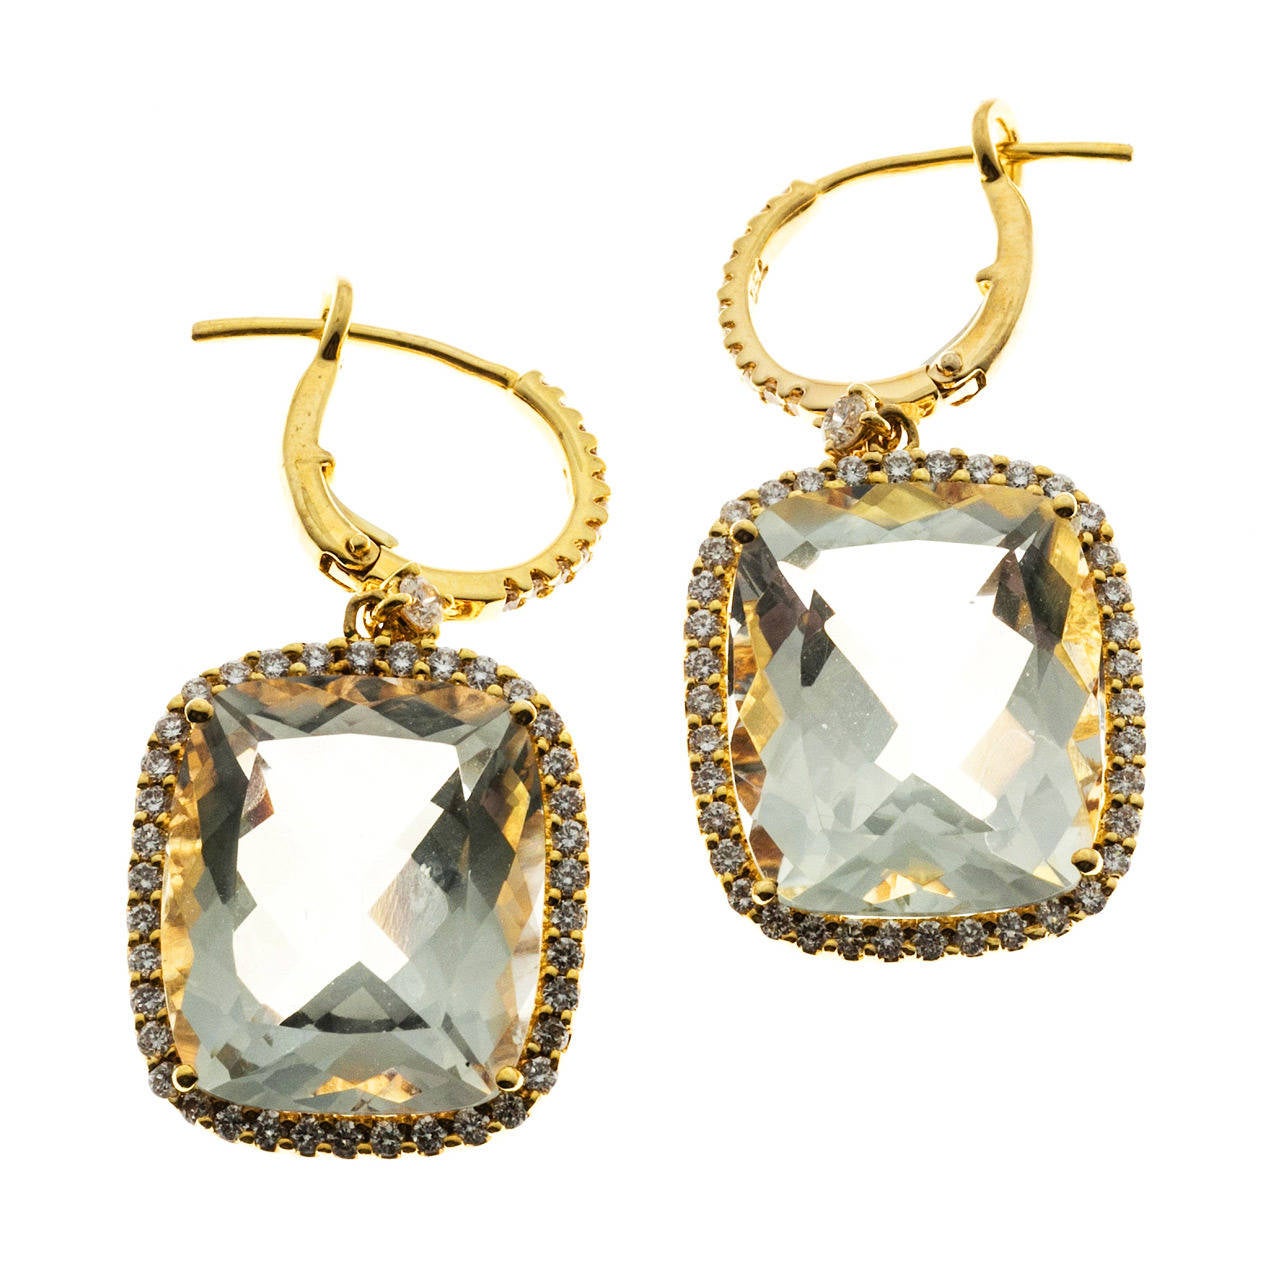 Euro wire tops and filigreed basket bottoms set with a total of 124 round high quality full cut diamonds in handmade 18k yellow gold settings. Each earring is set with a beautiful rare lightly colored slightly bluish green cushion cut quartz for a